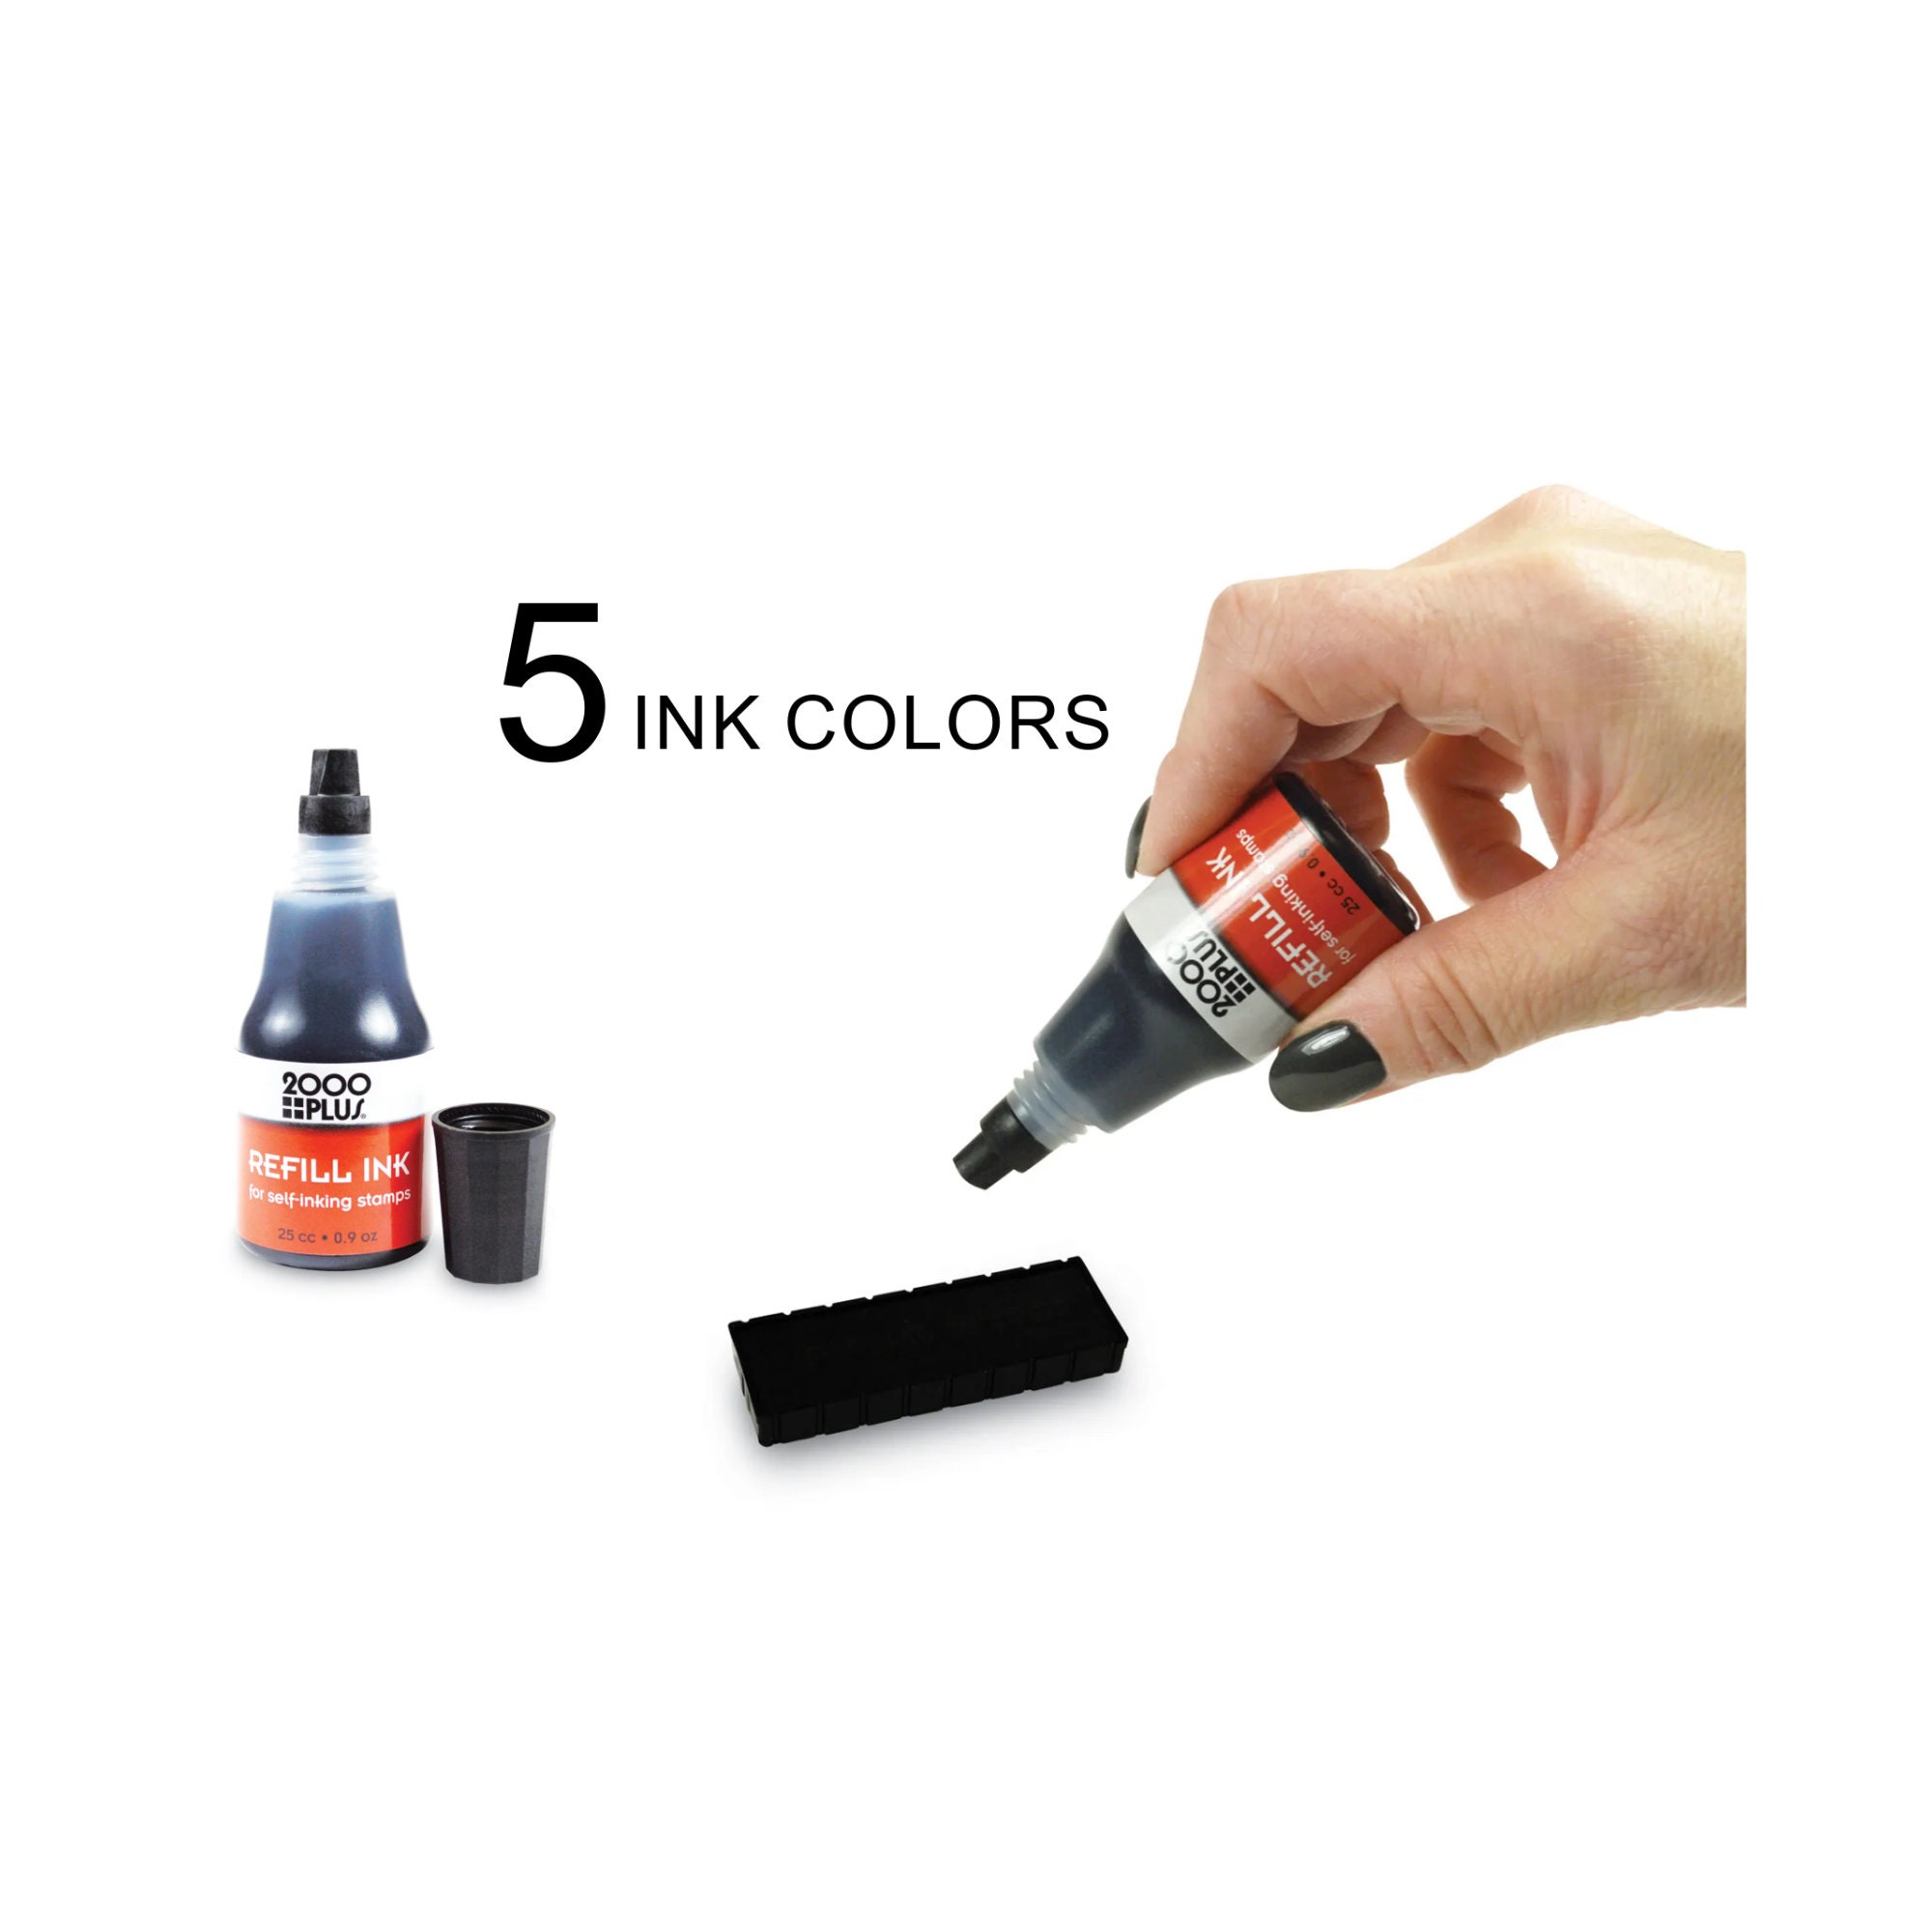 Fabric Ink Refill for Black Self-inking Stamp, .25 Oz Bottle of